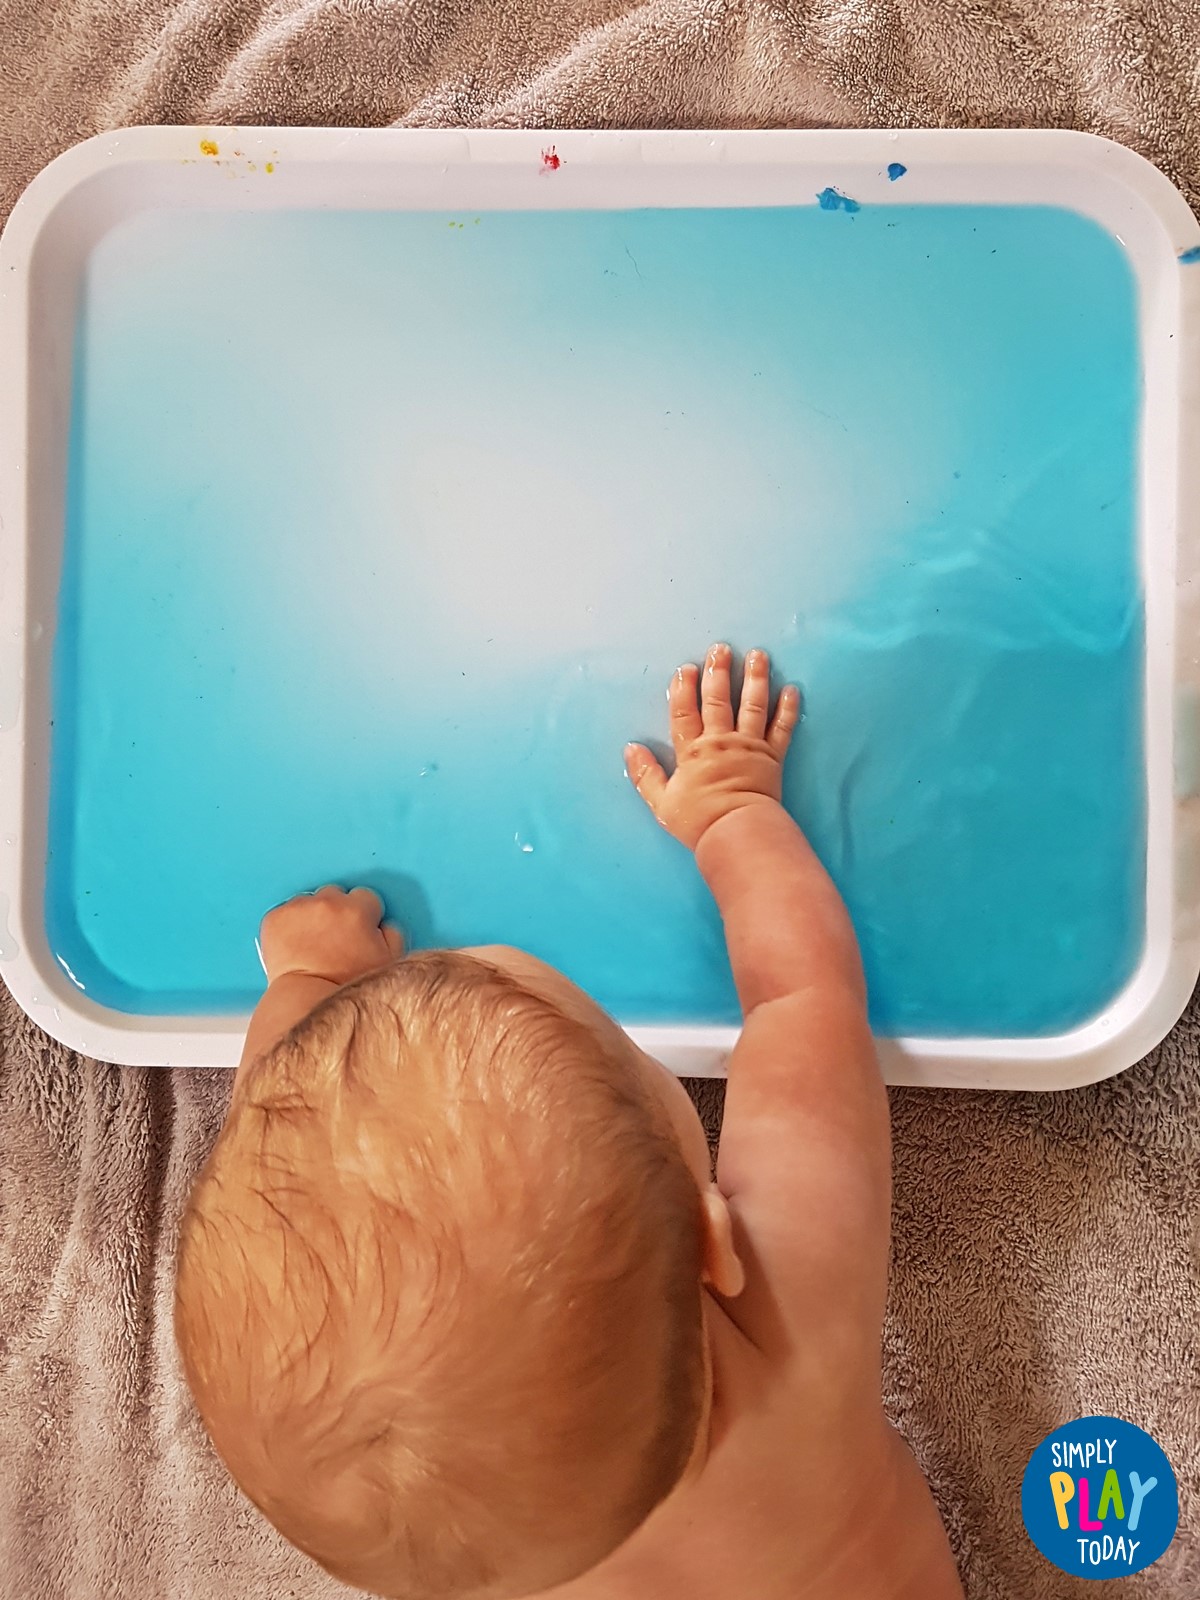 Month 6: Top 10 Sensory Activities for 6 month old baby » Sensory Lifestyle